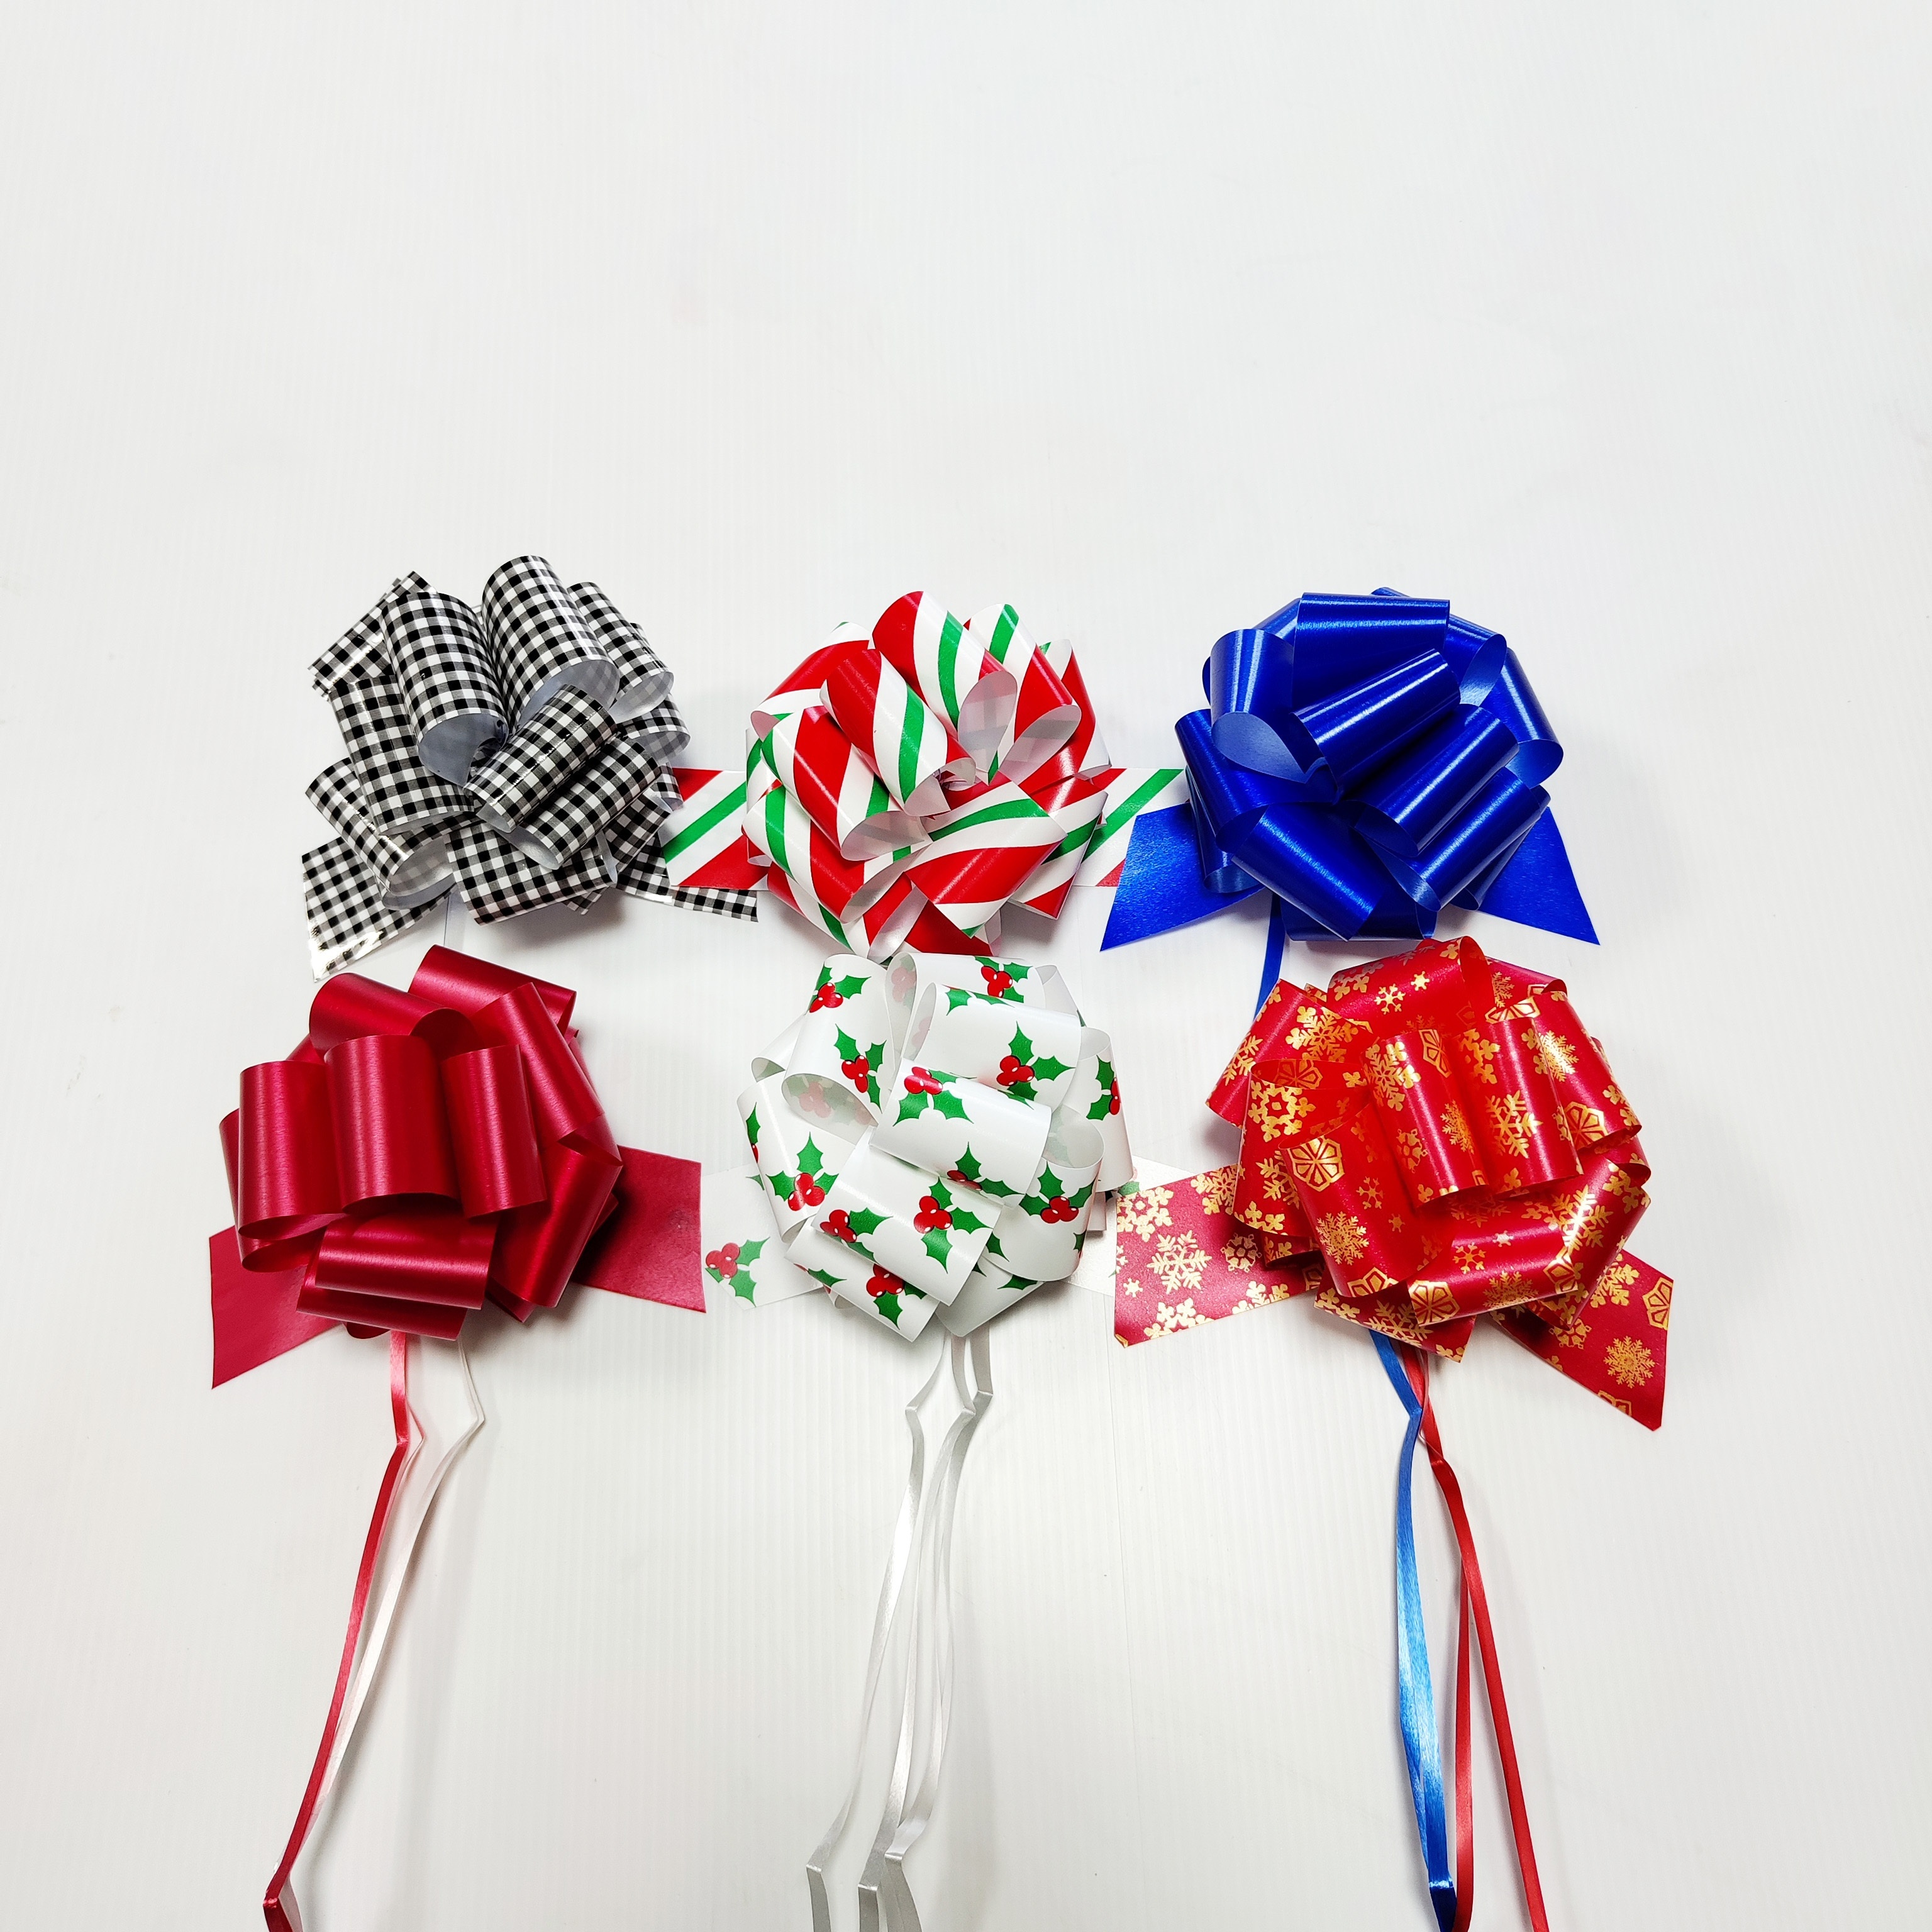  6 Pcs Large Gift Bow,Pull Bows for Gift Wrapping